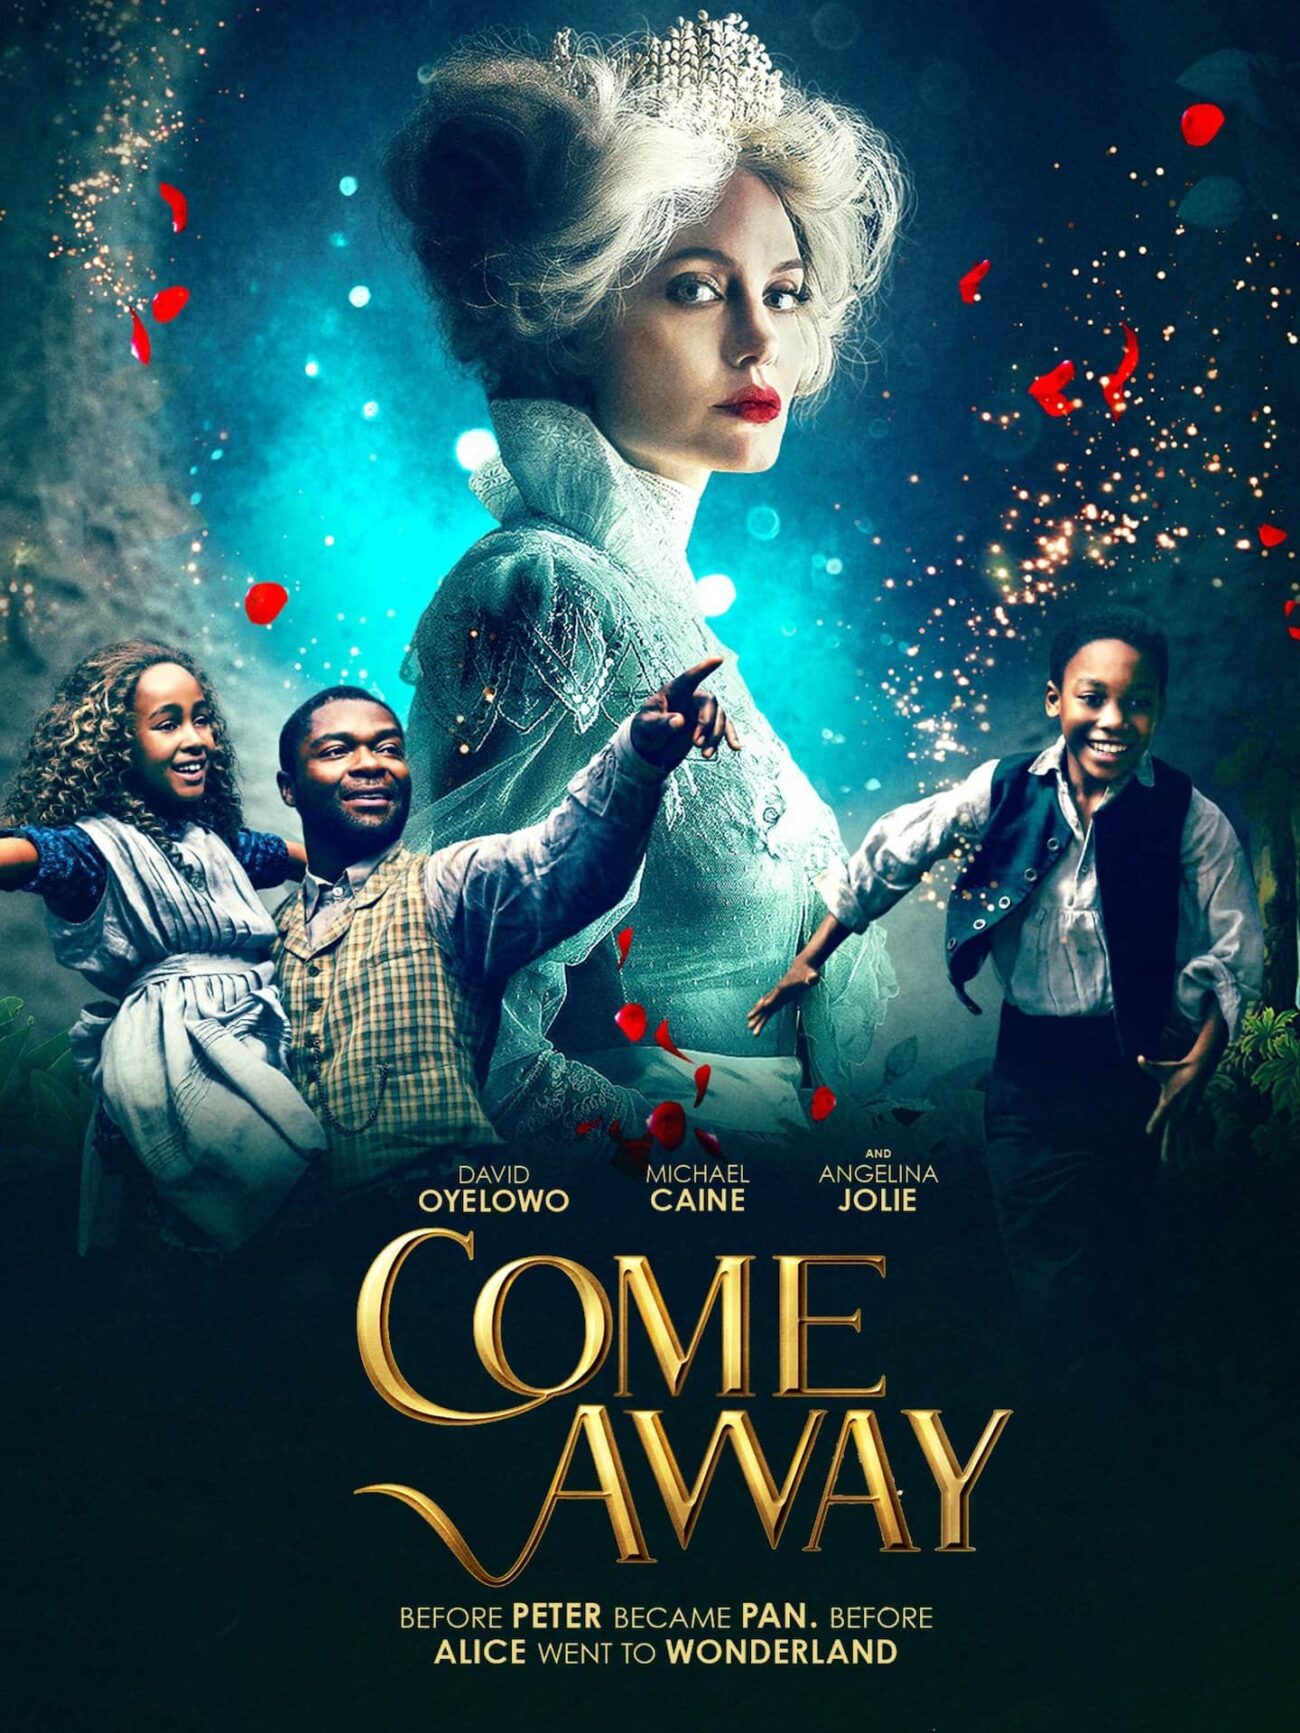 Two of the most beloved characters in literature, 'Alice in Wonderland' and 'Peter Pan', meet in a new imaginative origin story: 'Come Away'.